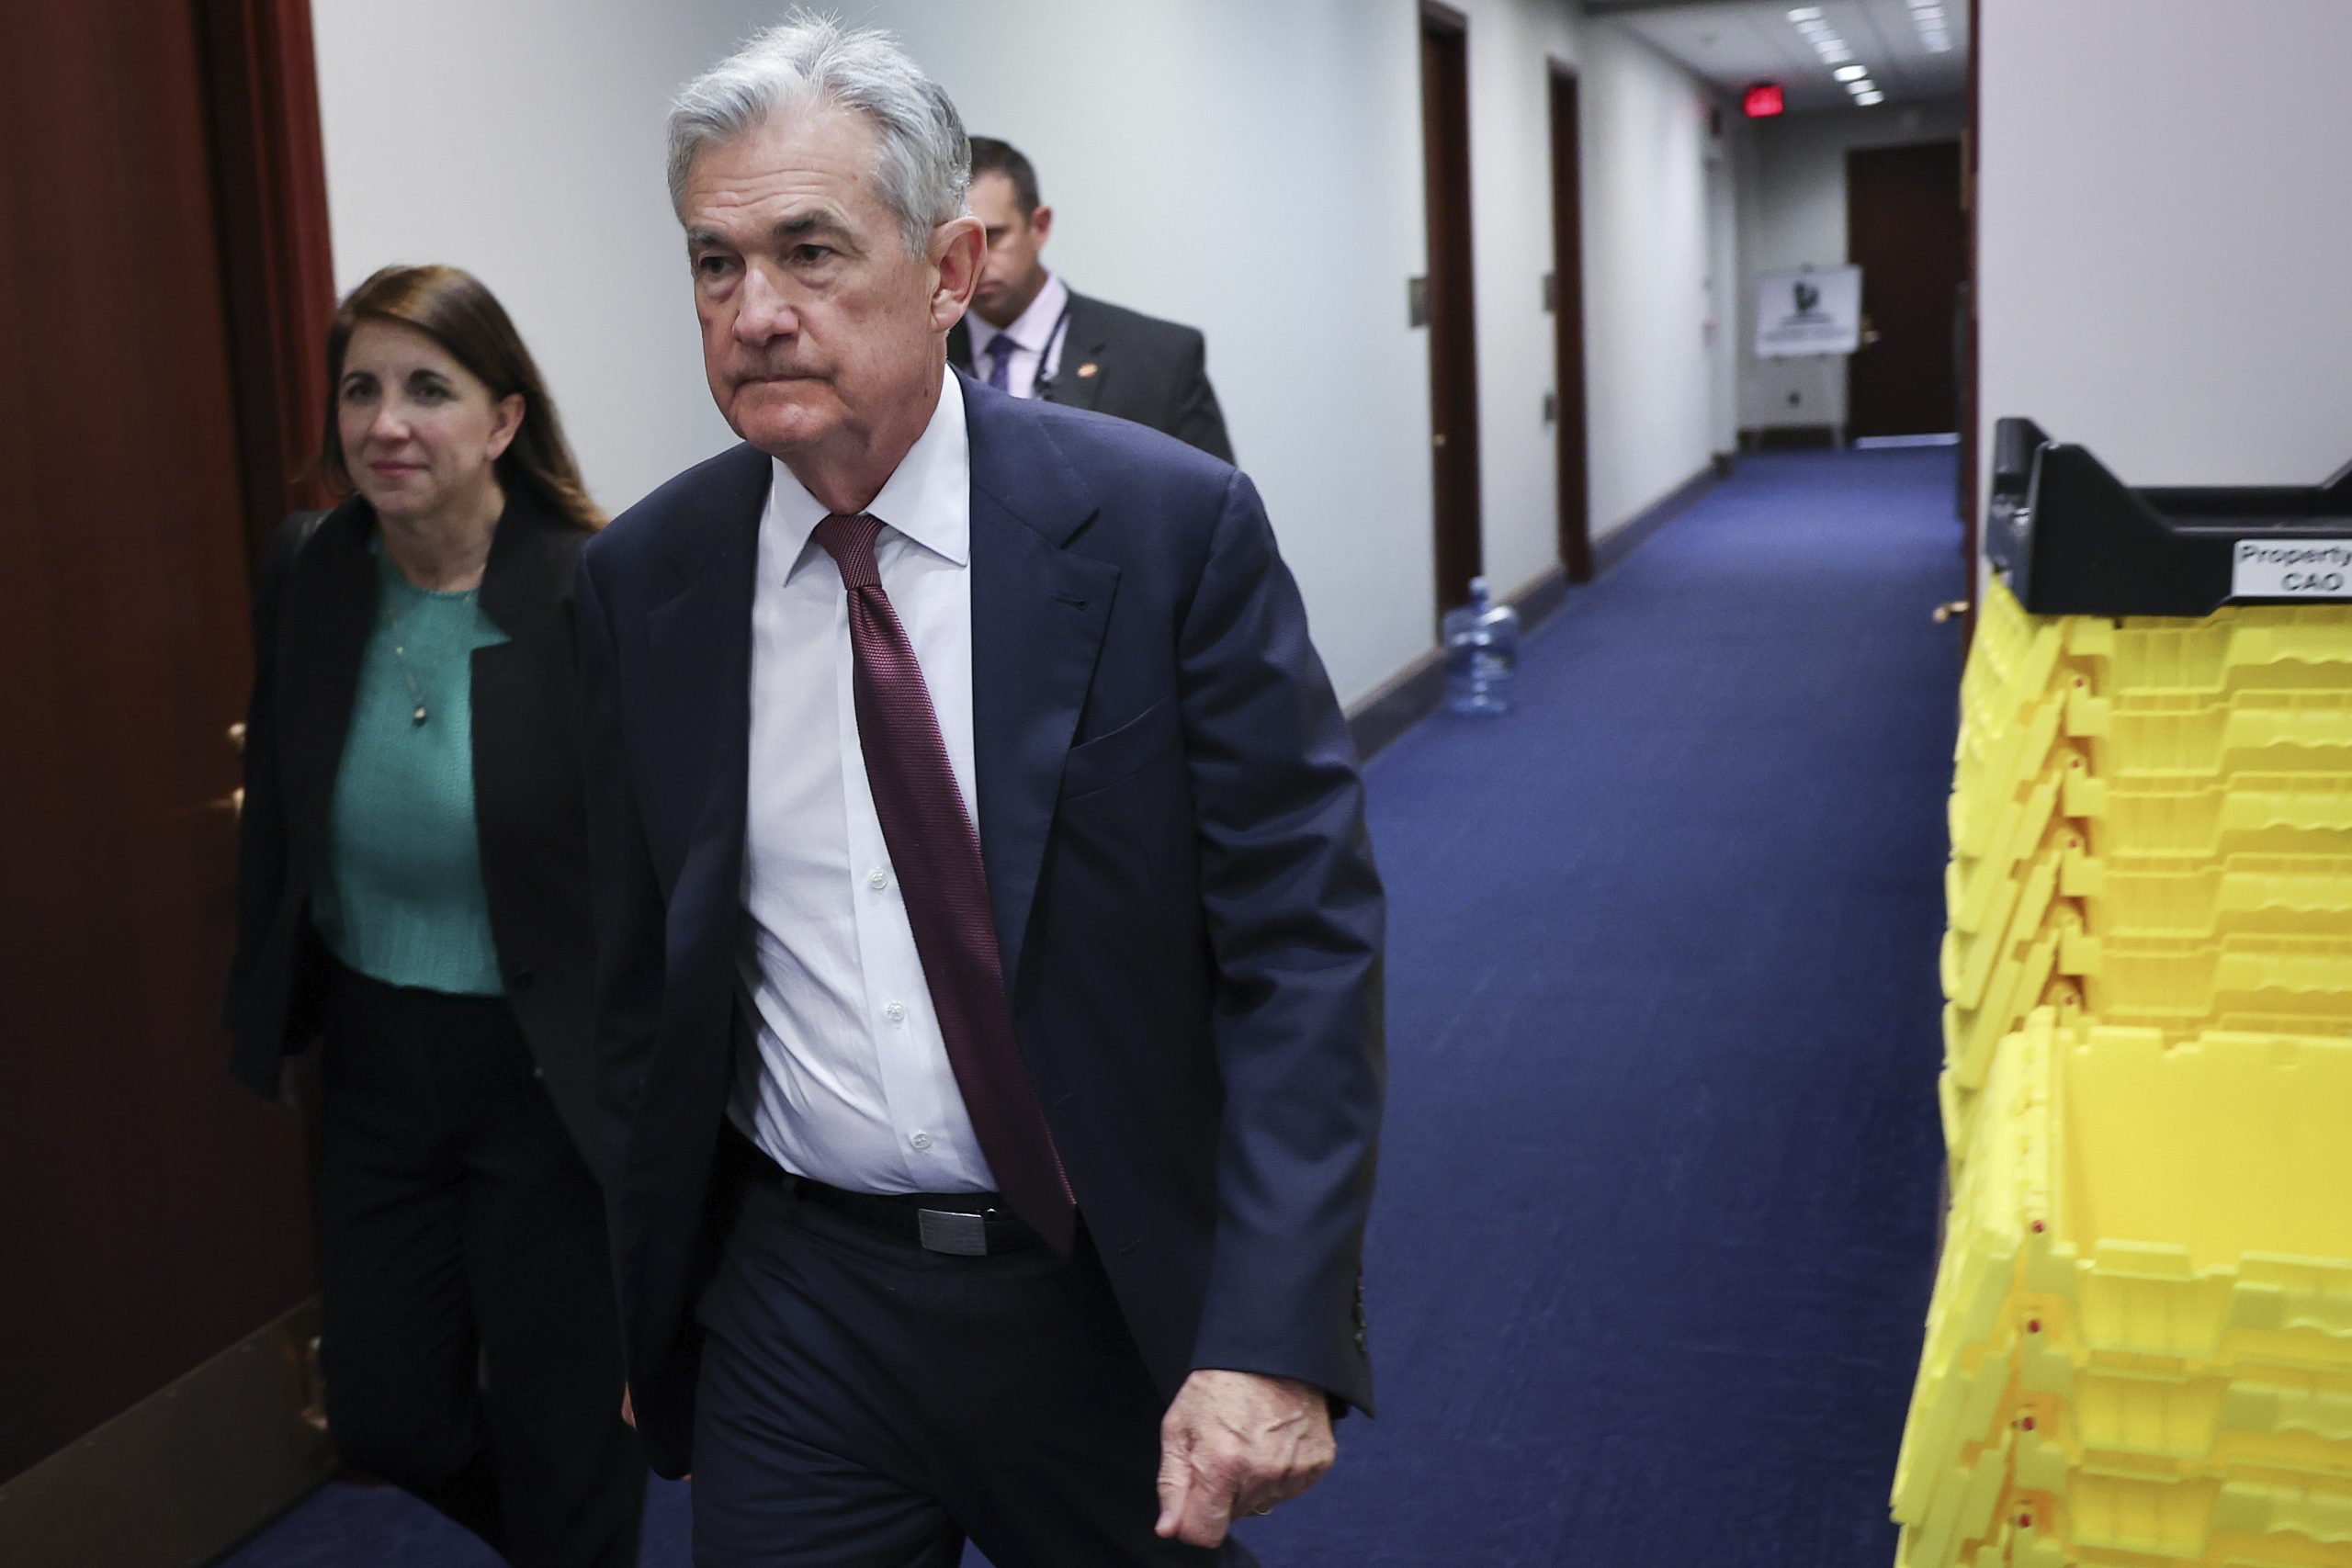 WASHINGTON, DC - MAY 23: Federal Reserve Chairman Jerome Powell arrives for a meeting on the House side of the U.S. Capitol May 23, 2023 in Washington, DC. Powell addressed the New Democratic Coalition on the debt ceiling, inflation and interest rates. (Photo by Win McNamee/Getty Images)